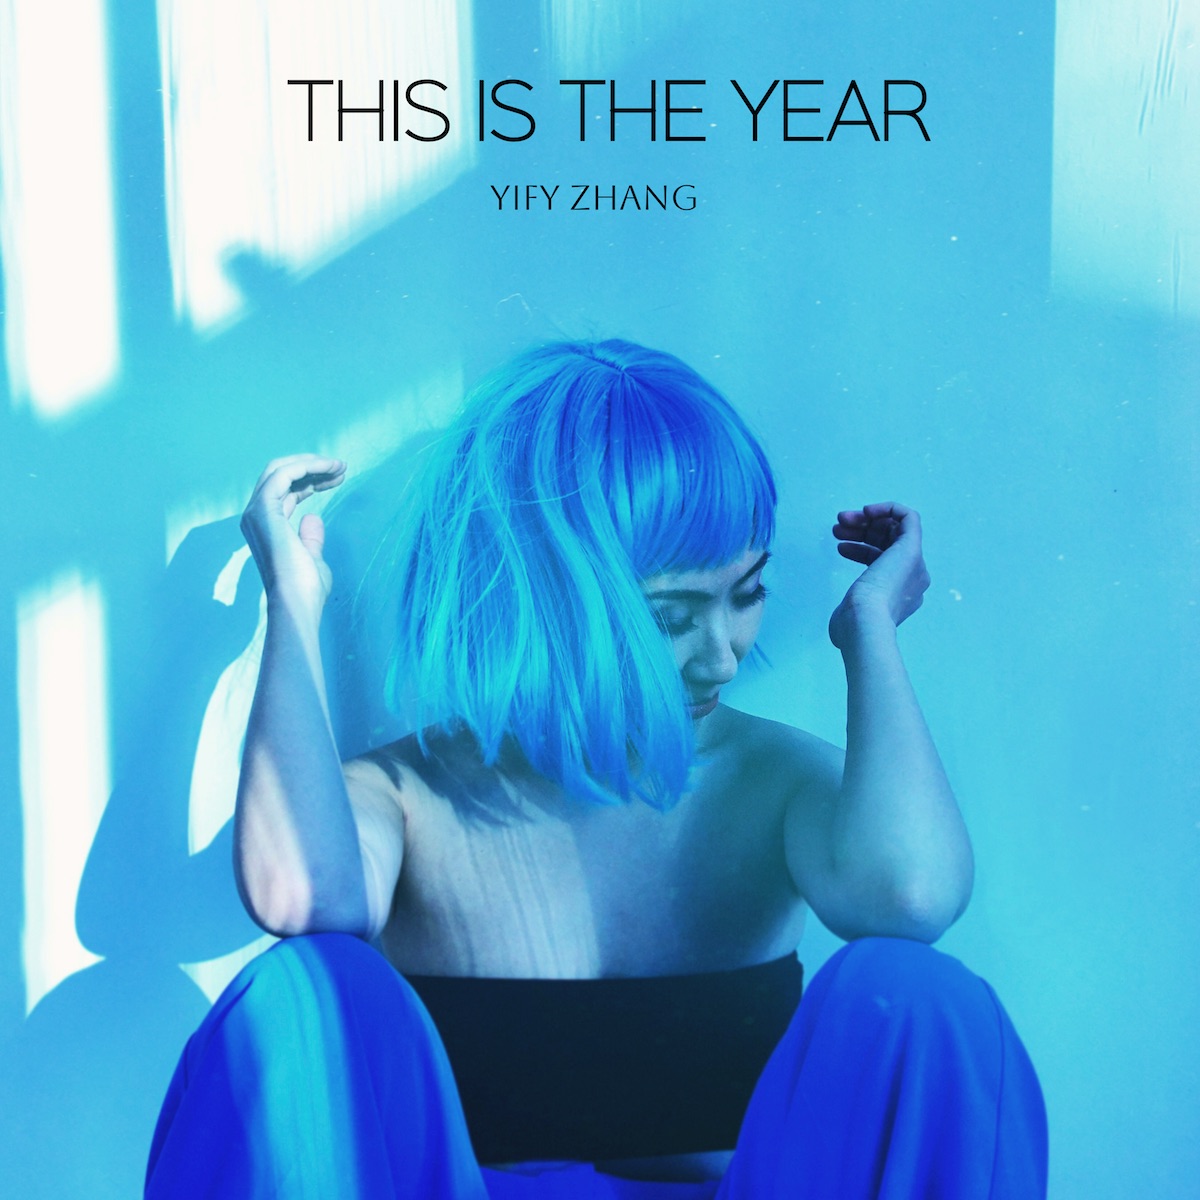 LISTEN: “This is the Year” by Yify Zhang